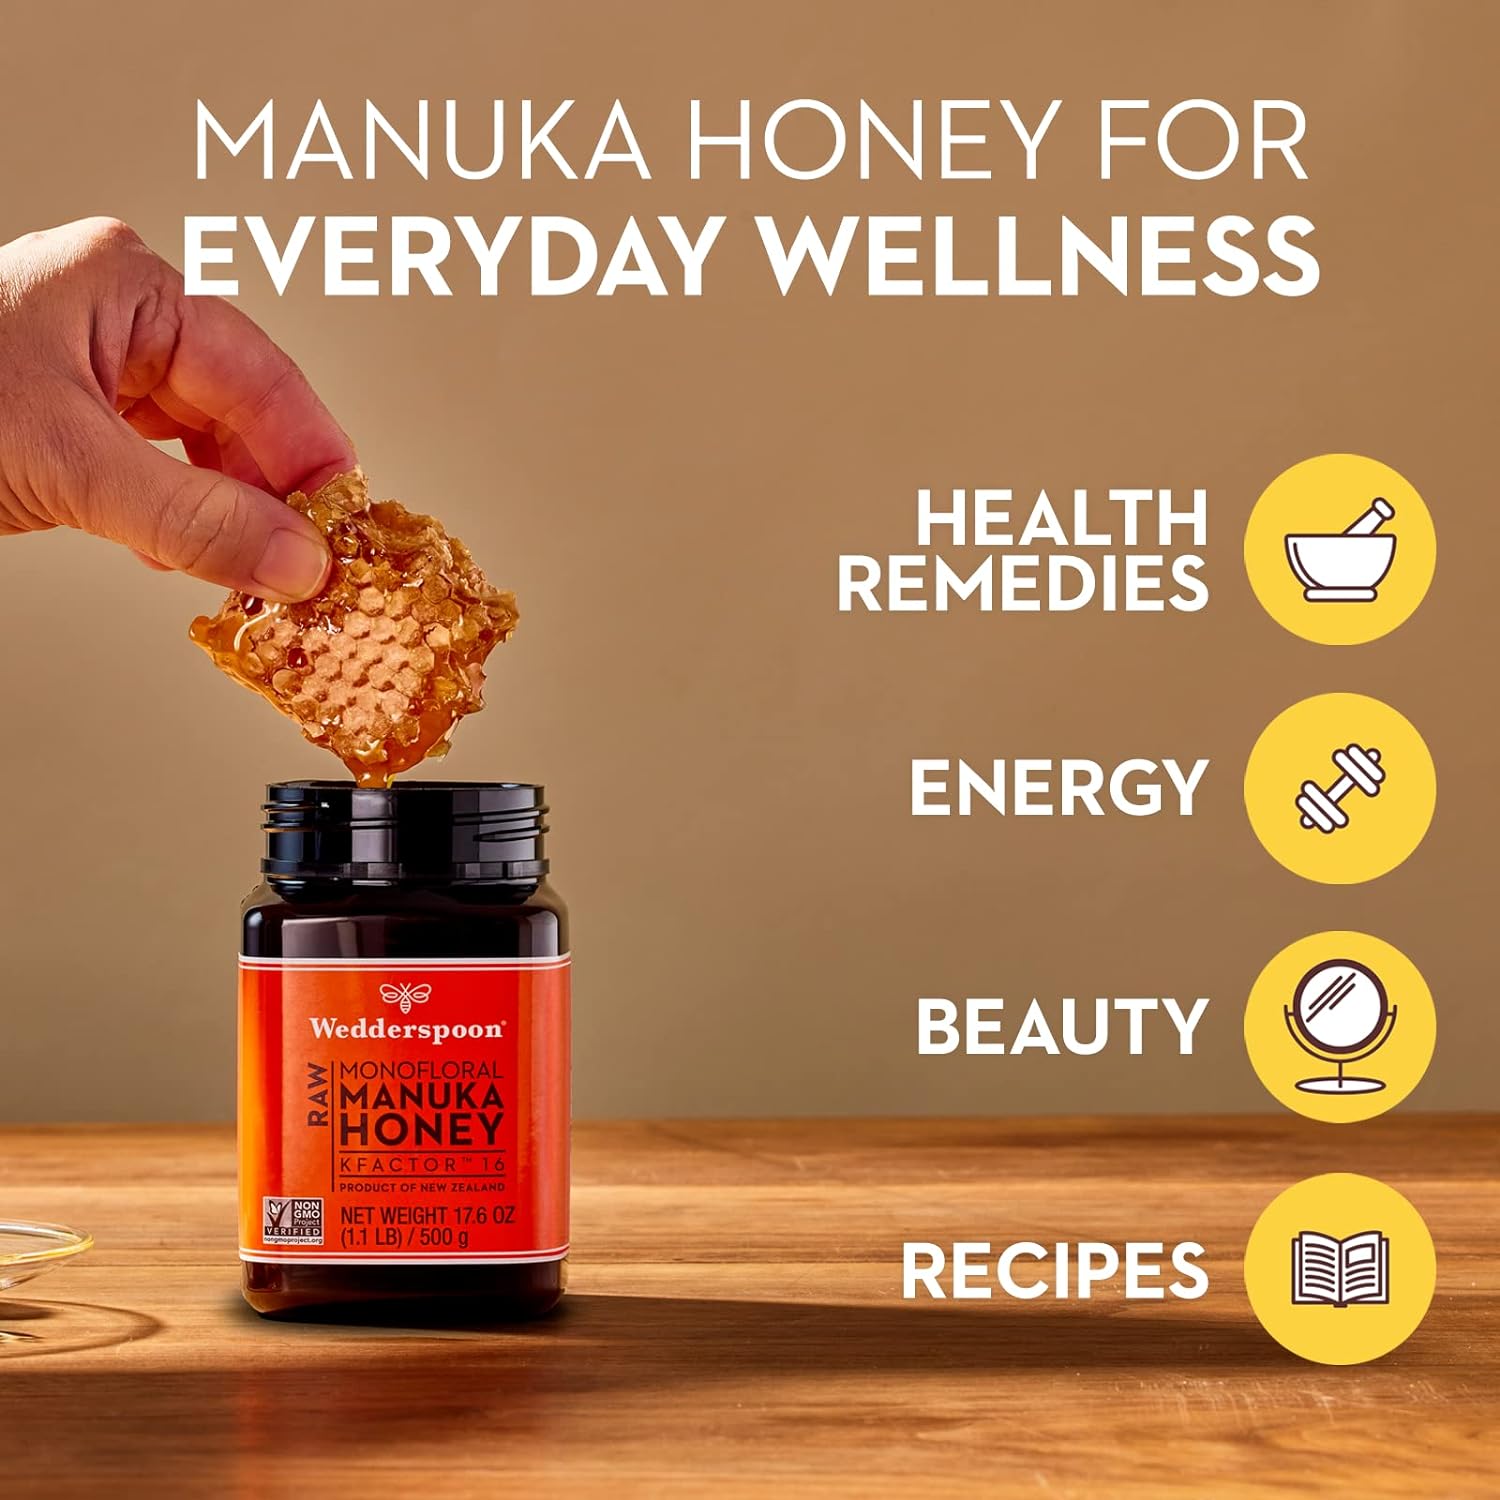 Wedderspoon Raw Premium Manuka Honey, KFactor 16, 8 Oz (Pack of 2), Unpasteurized, Genuine New Zealand Honey, Traceable From Our Hives To Your Home : Grocery & Gourmet Food